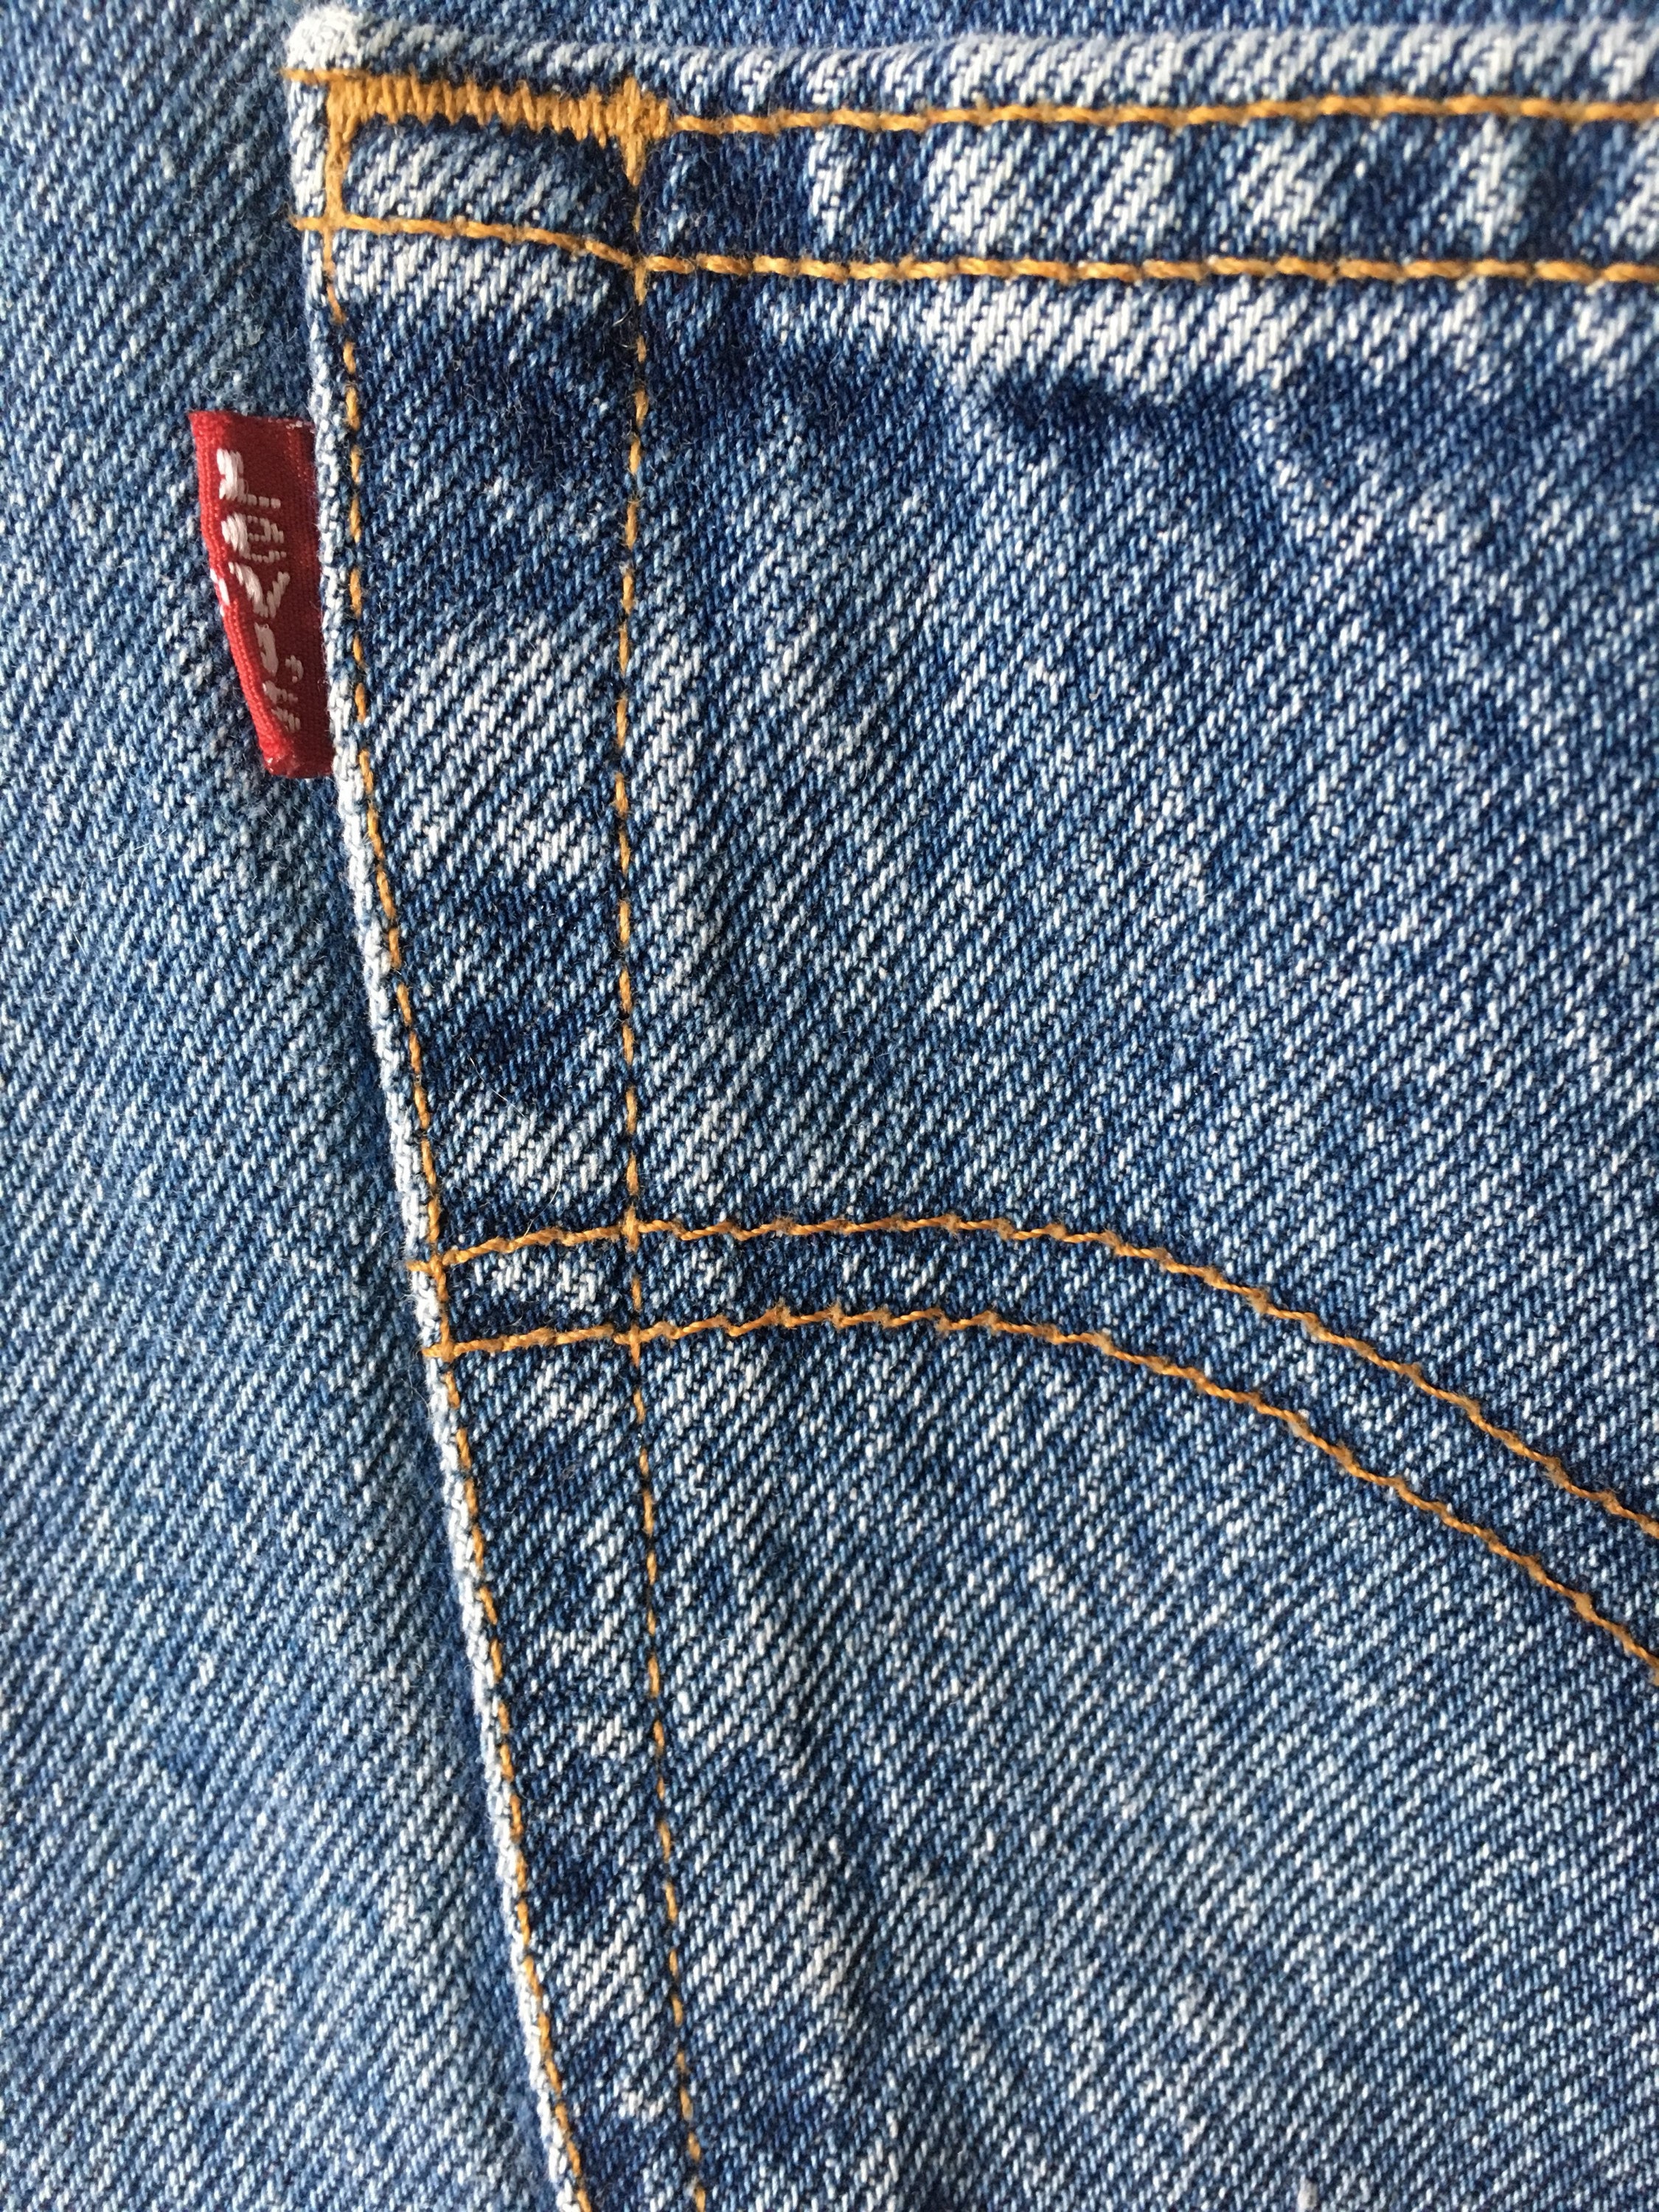 Vintage Levi's 501 Red Tab Women's Denim Jeans with Button Fly Measured ...